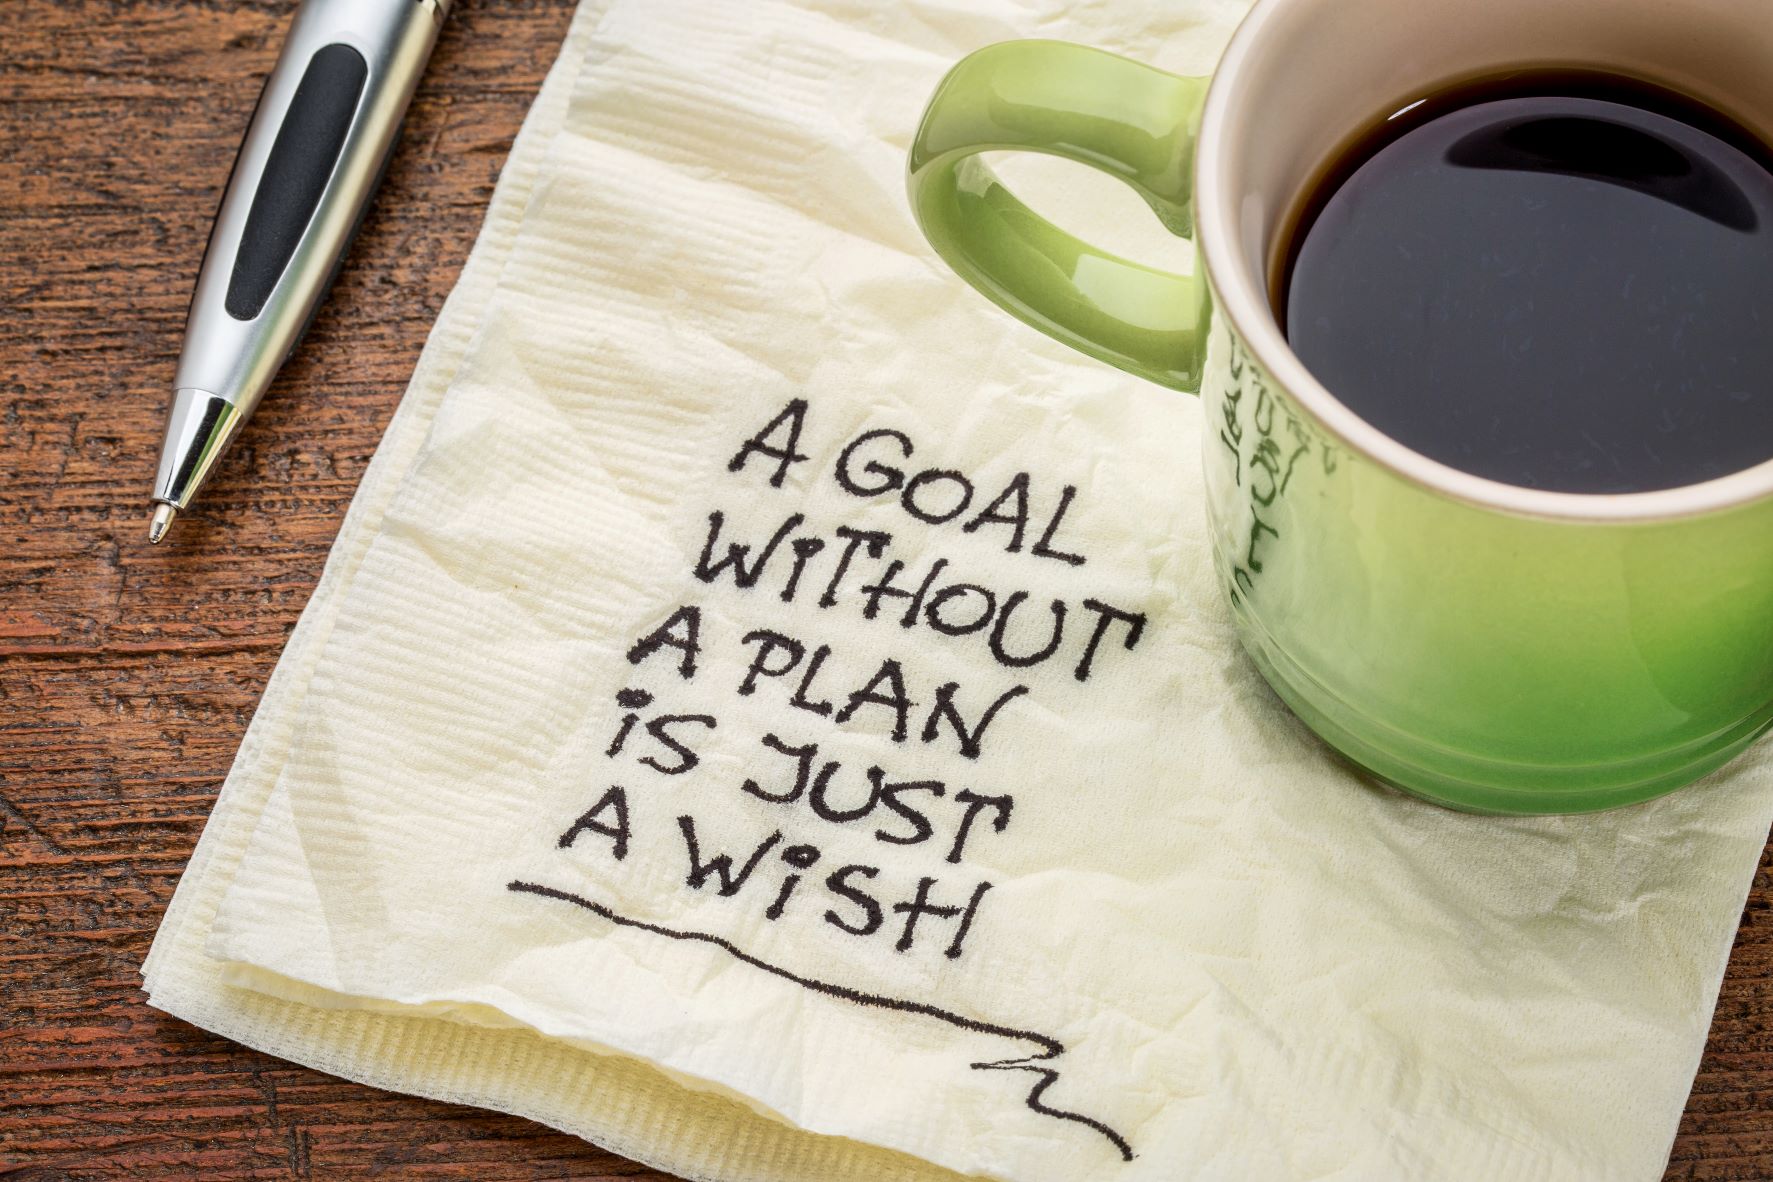 It’s Time to Recommit to Your Goals